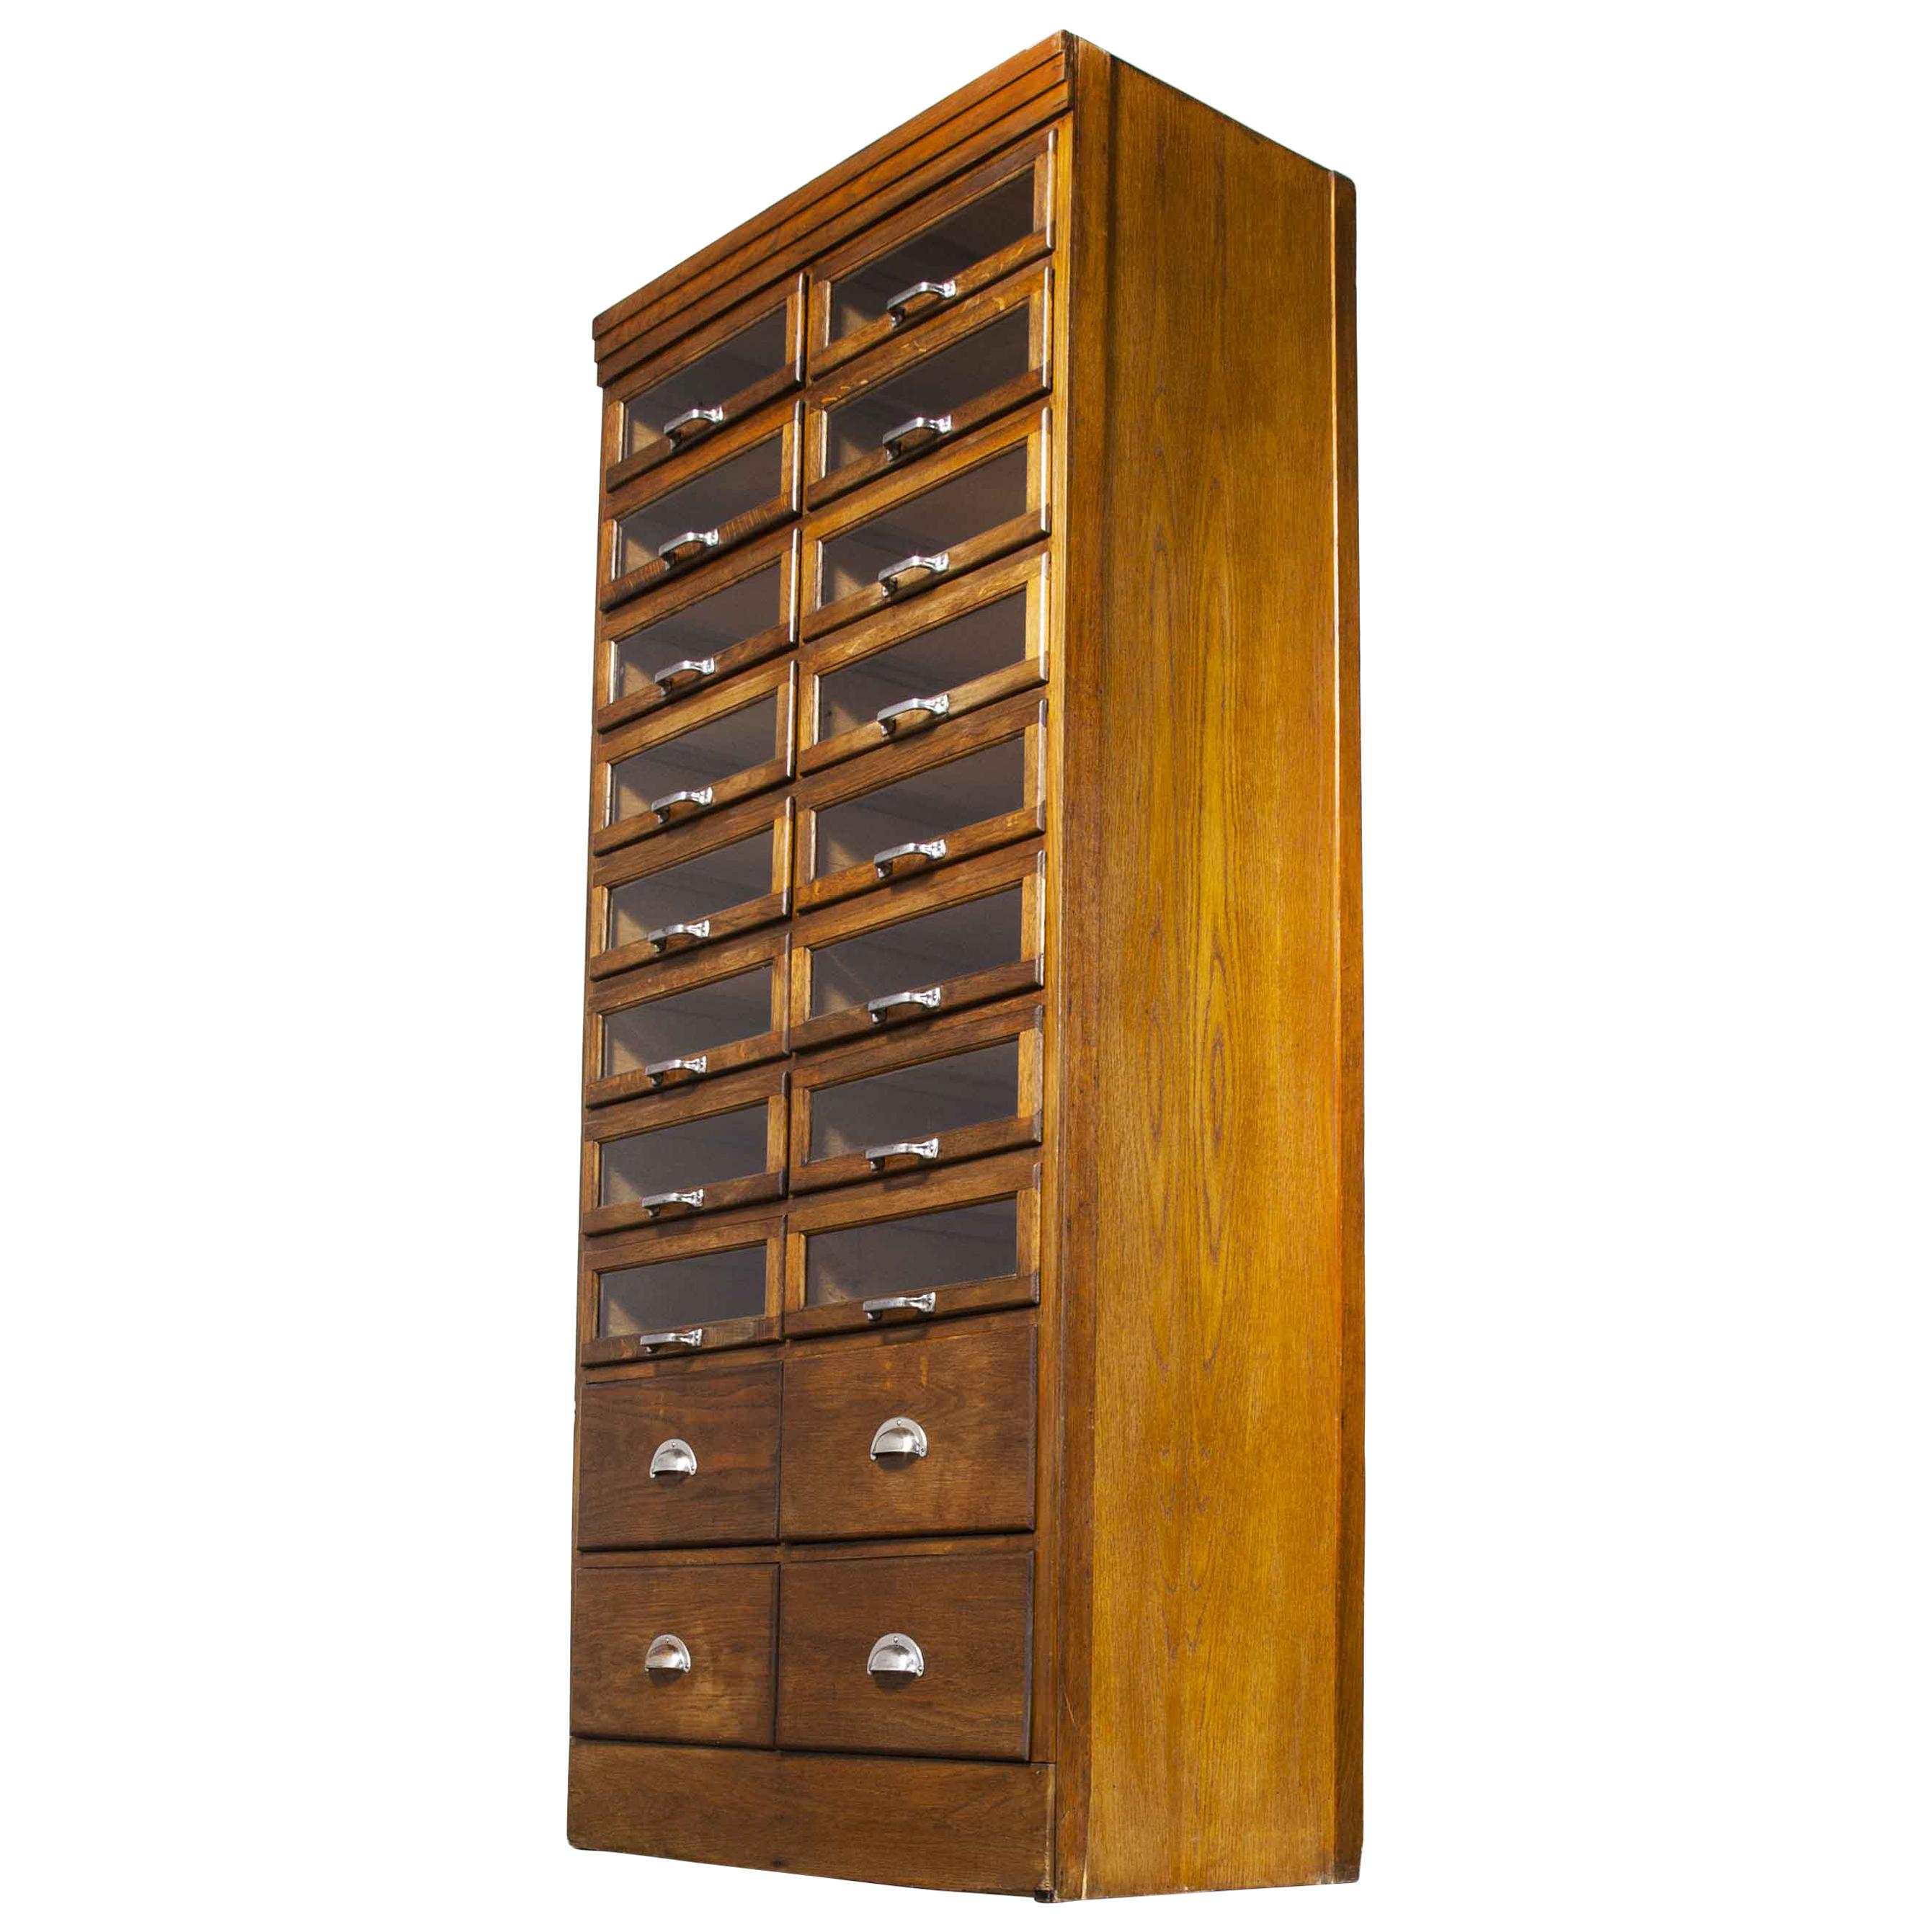 1940's Tall Glass Fronted Habersdashery Cabinet, Twenty Drawers